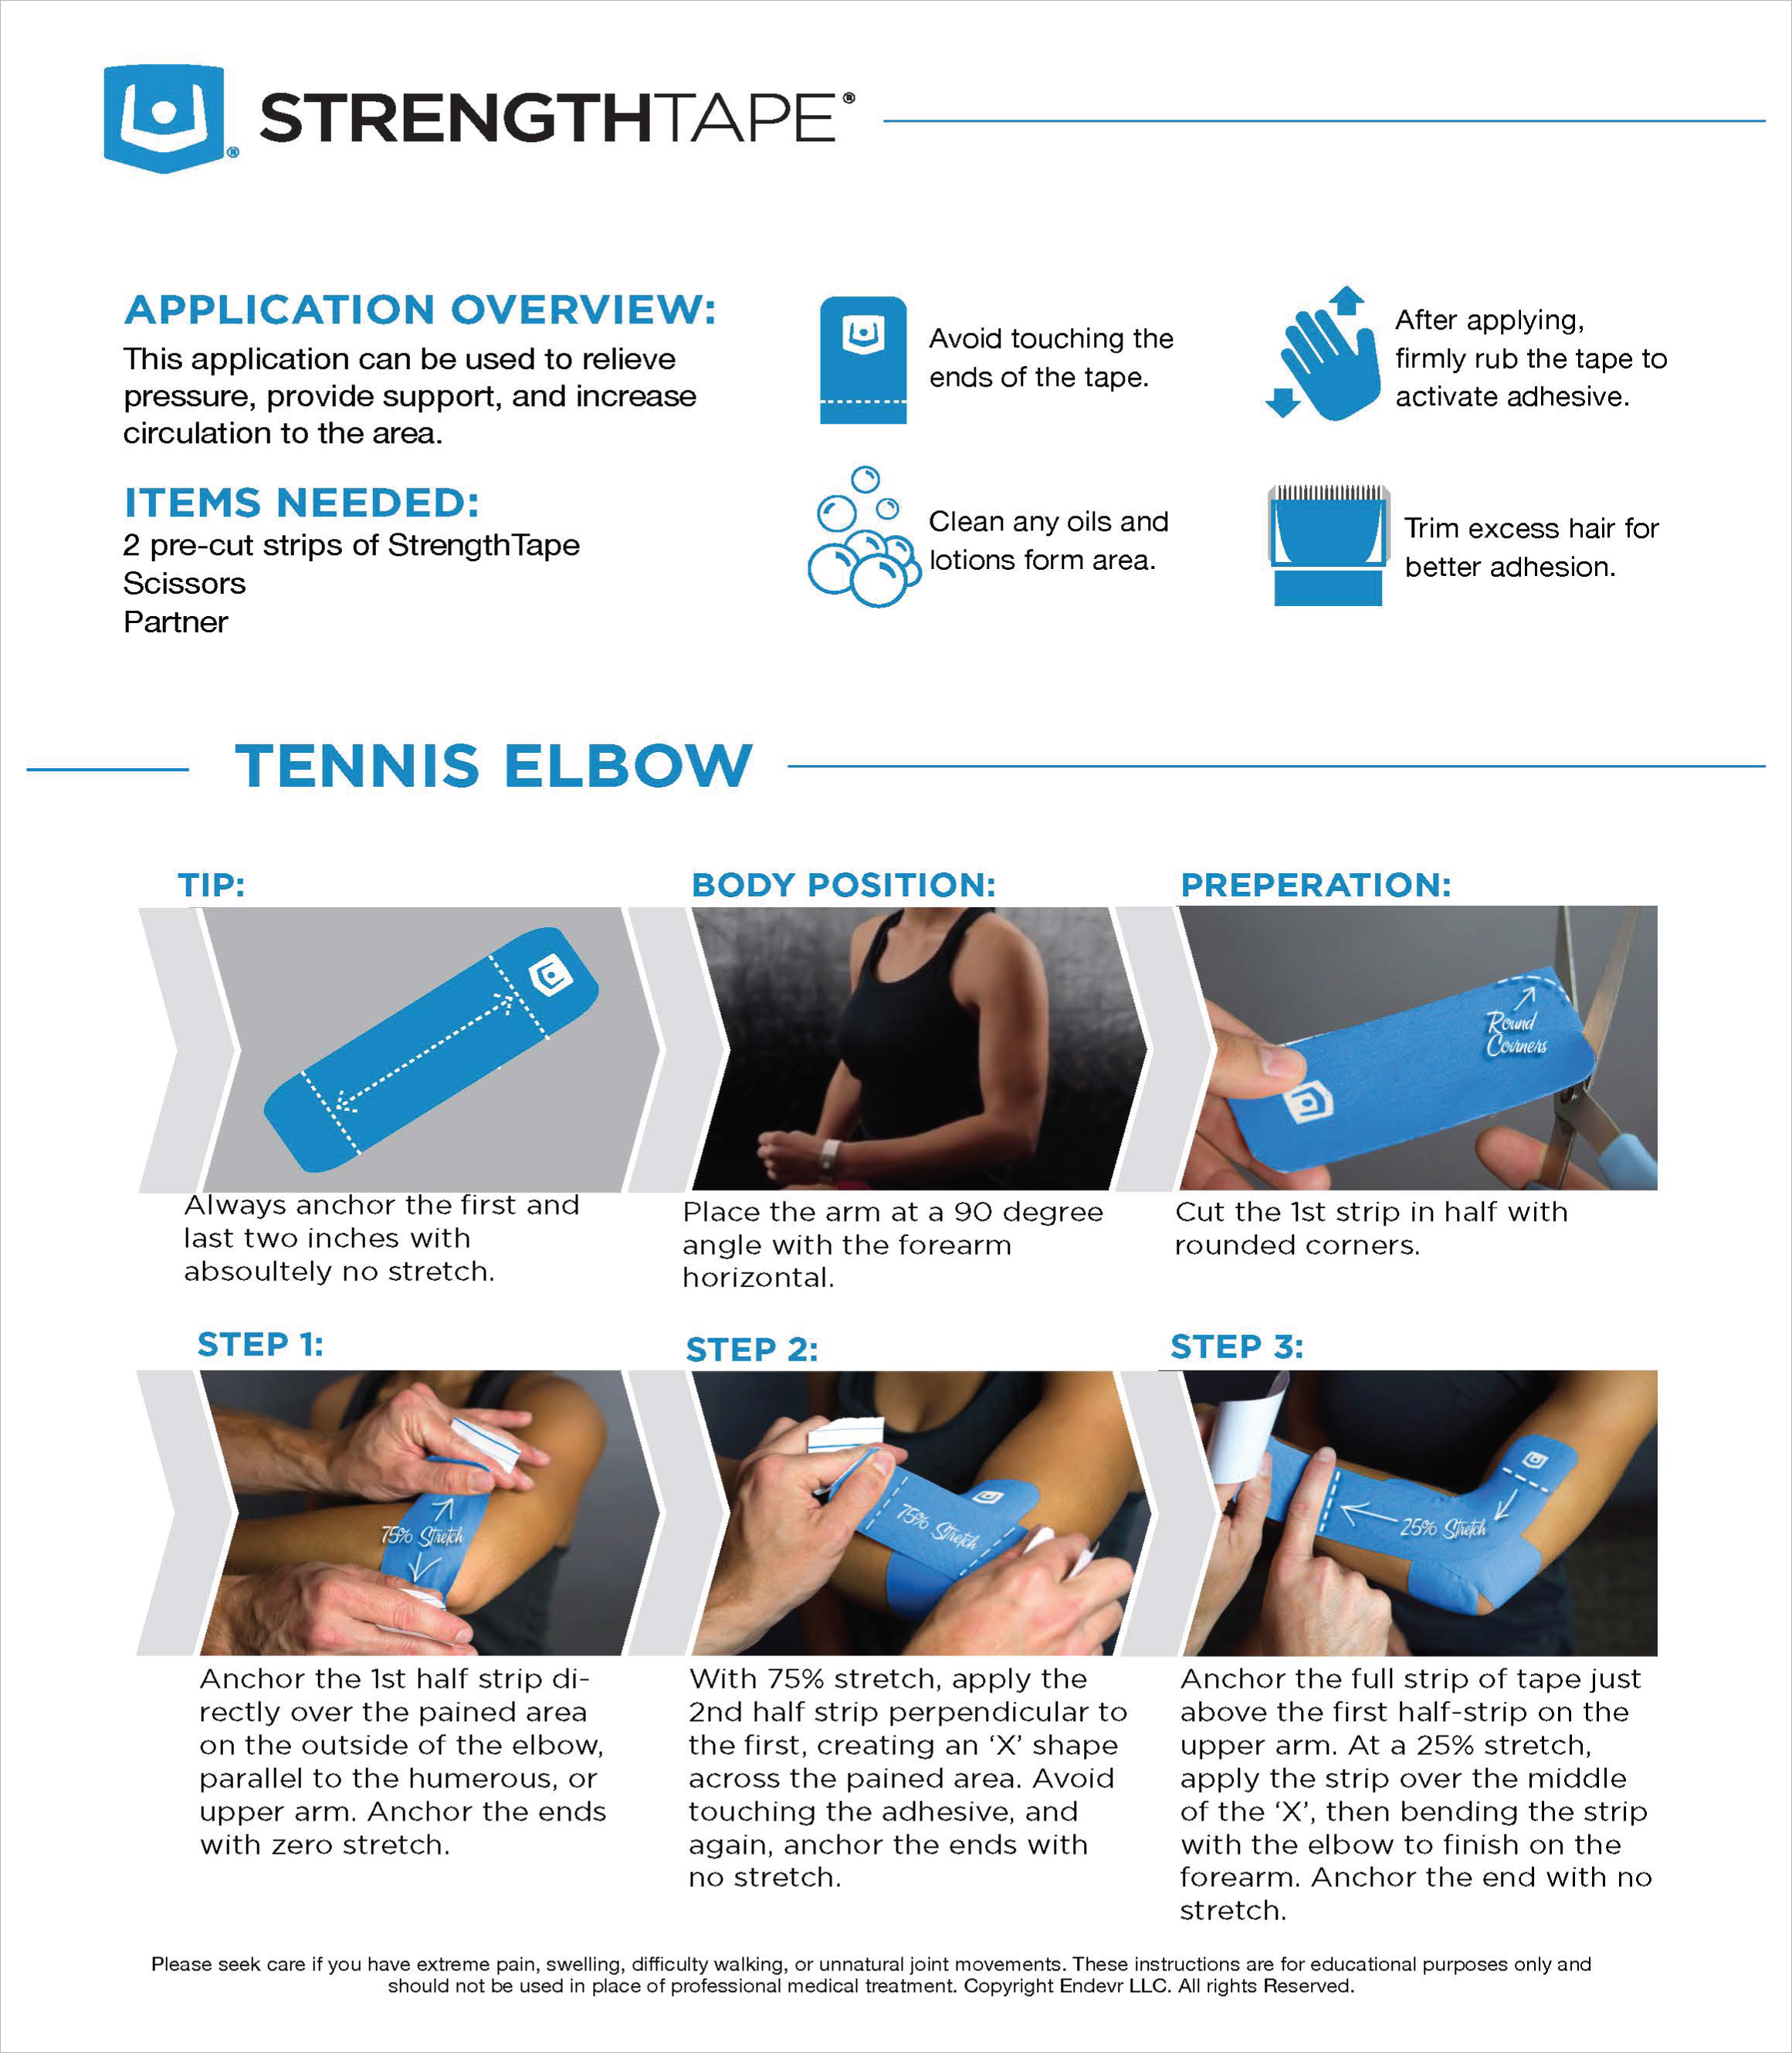 StrengthTape Tennis Elbow Taping Instructions